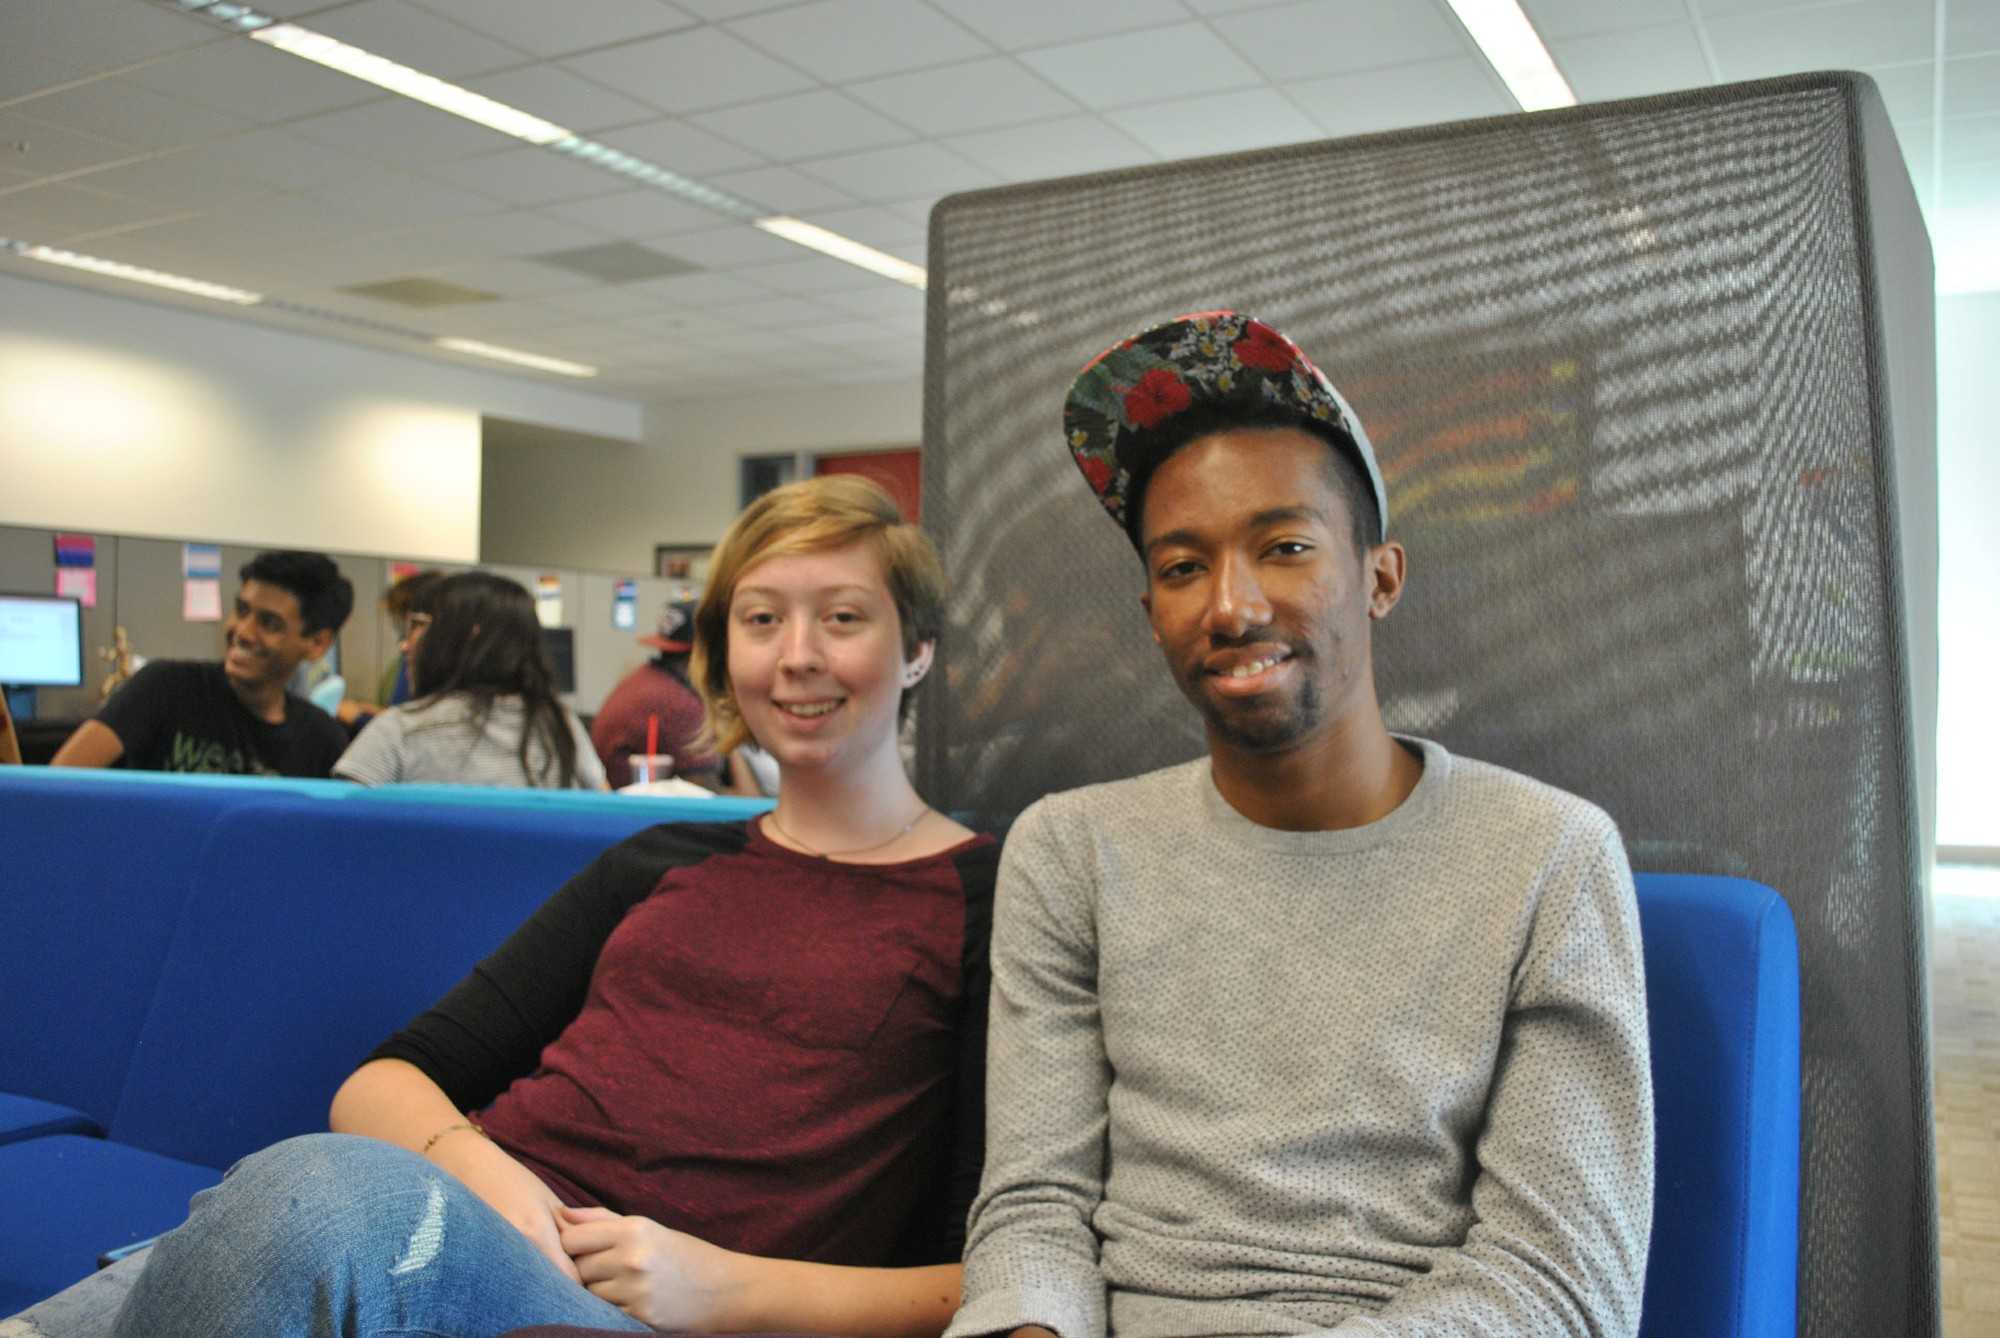 Two students shown in the pride center